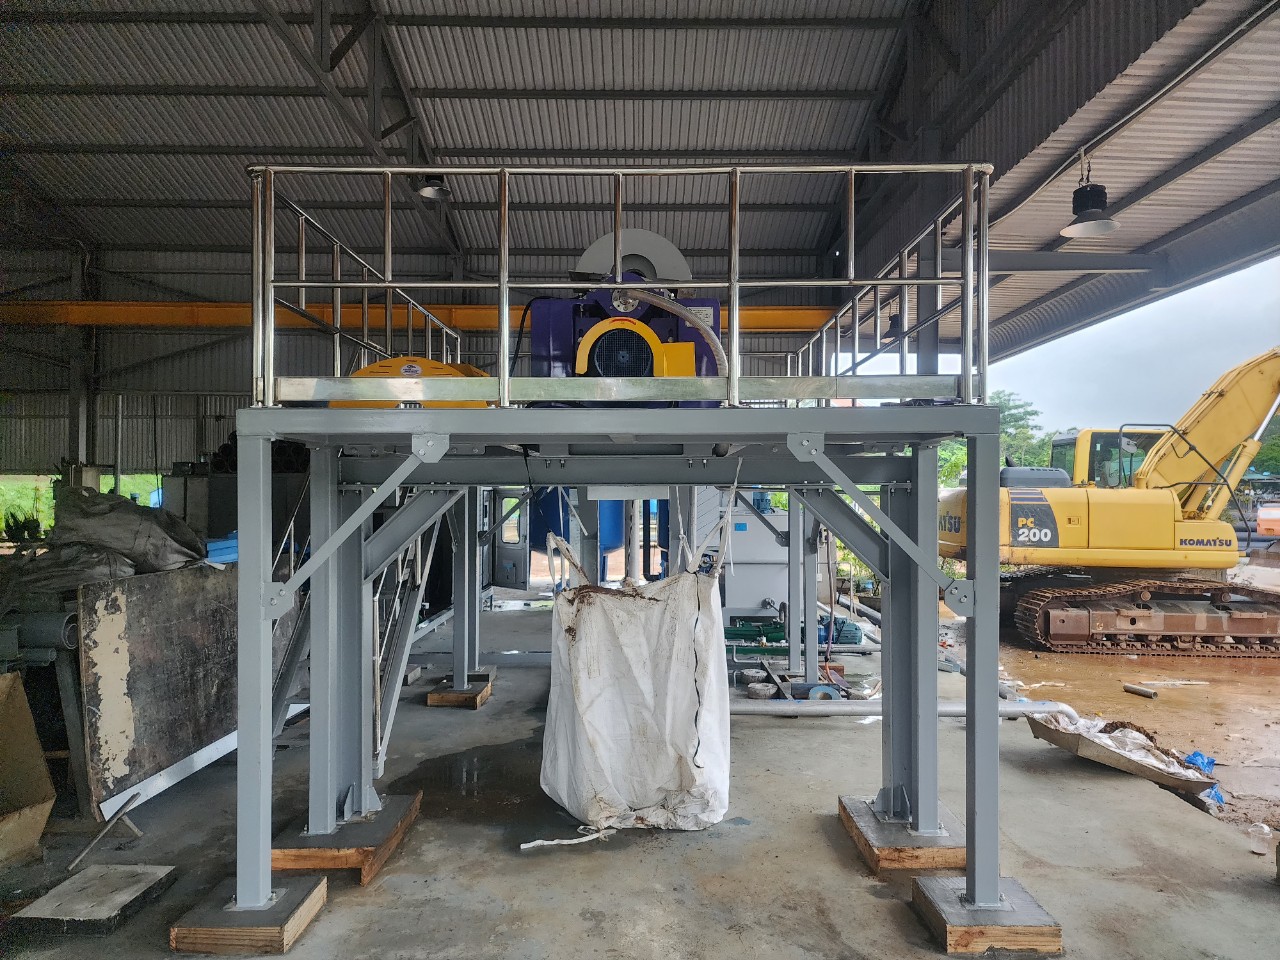 Providing centrifuge sludge dewatering machines for Hue water supply plant